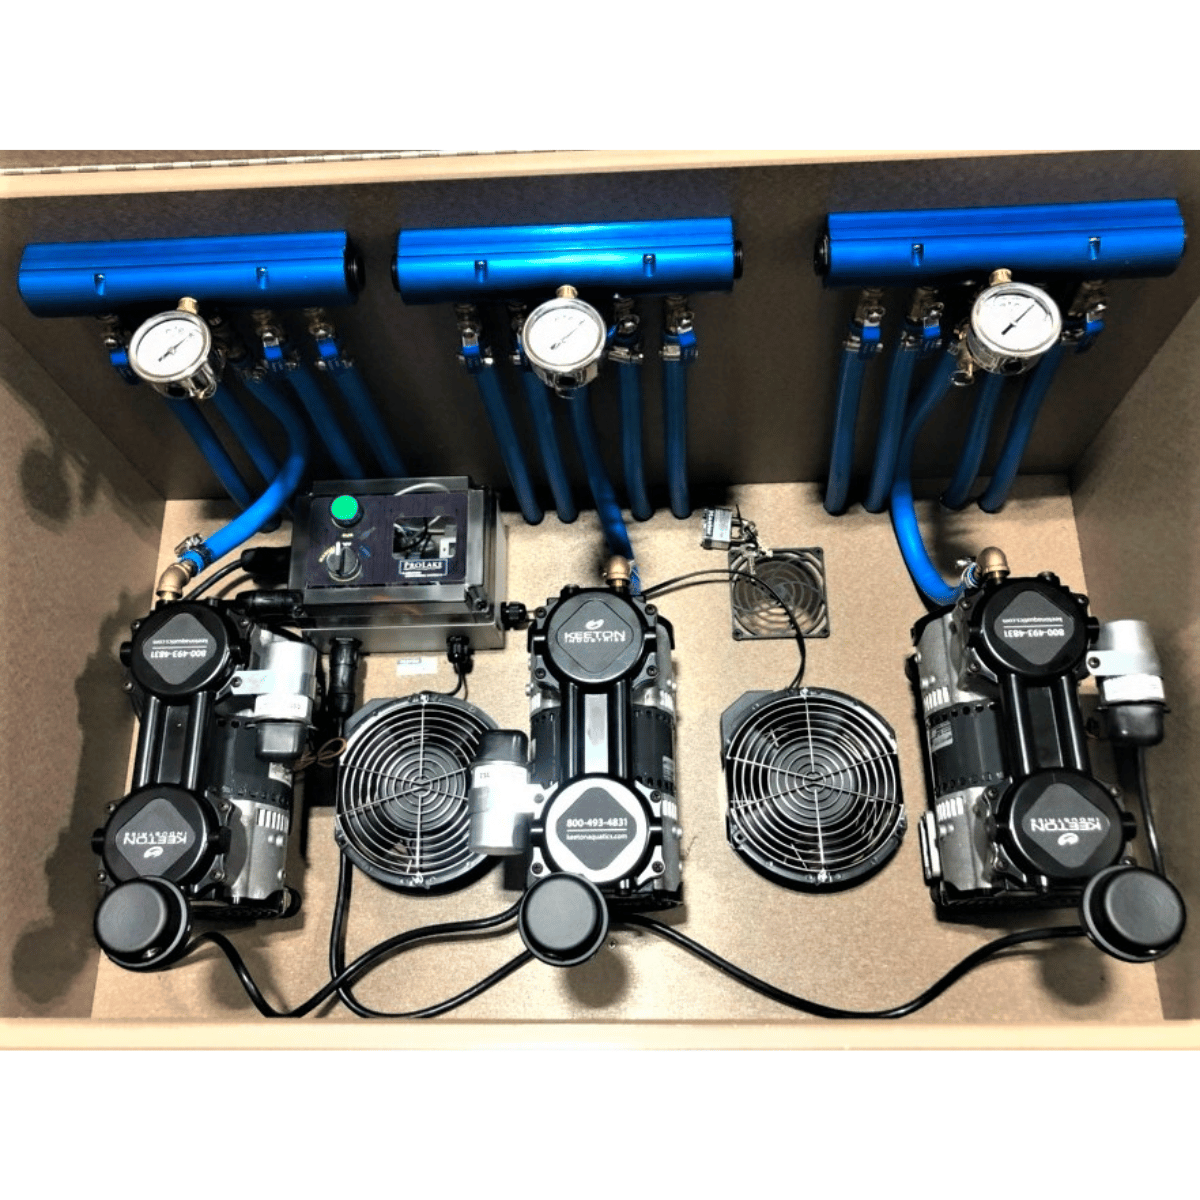 PROLAKE 3.12 Aeration System - Cabinet Internal View with the Compressor